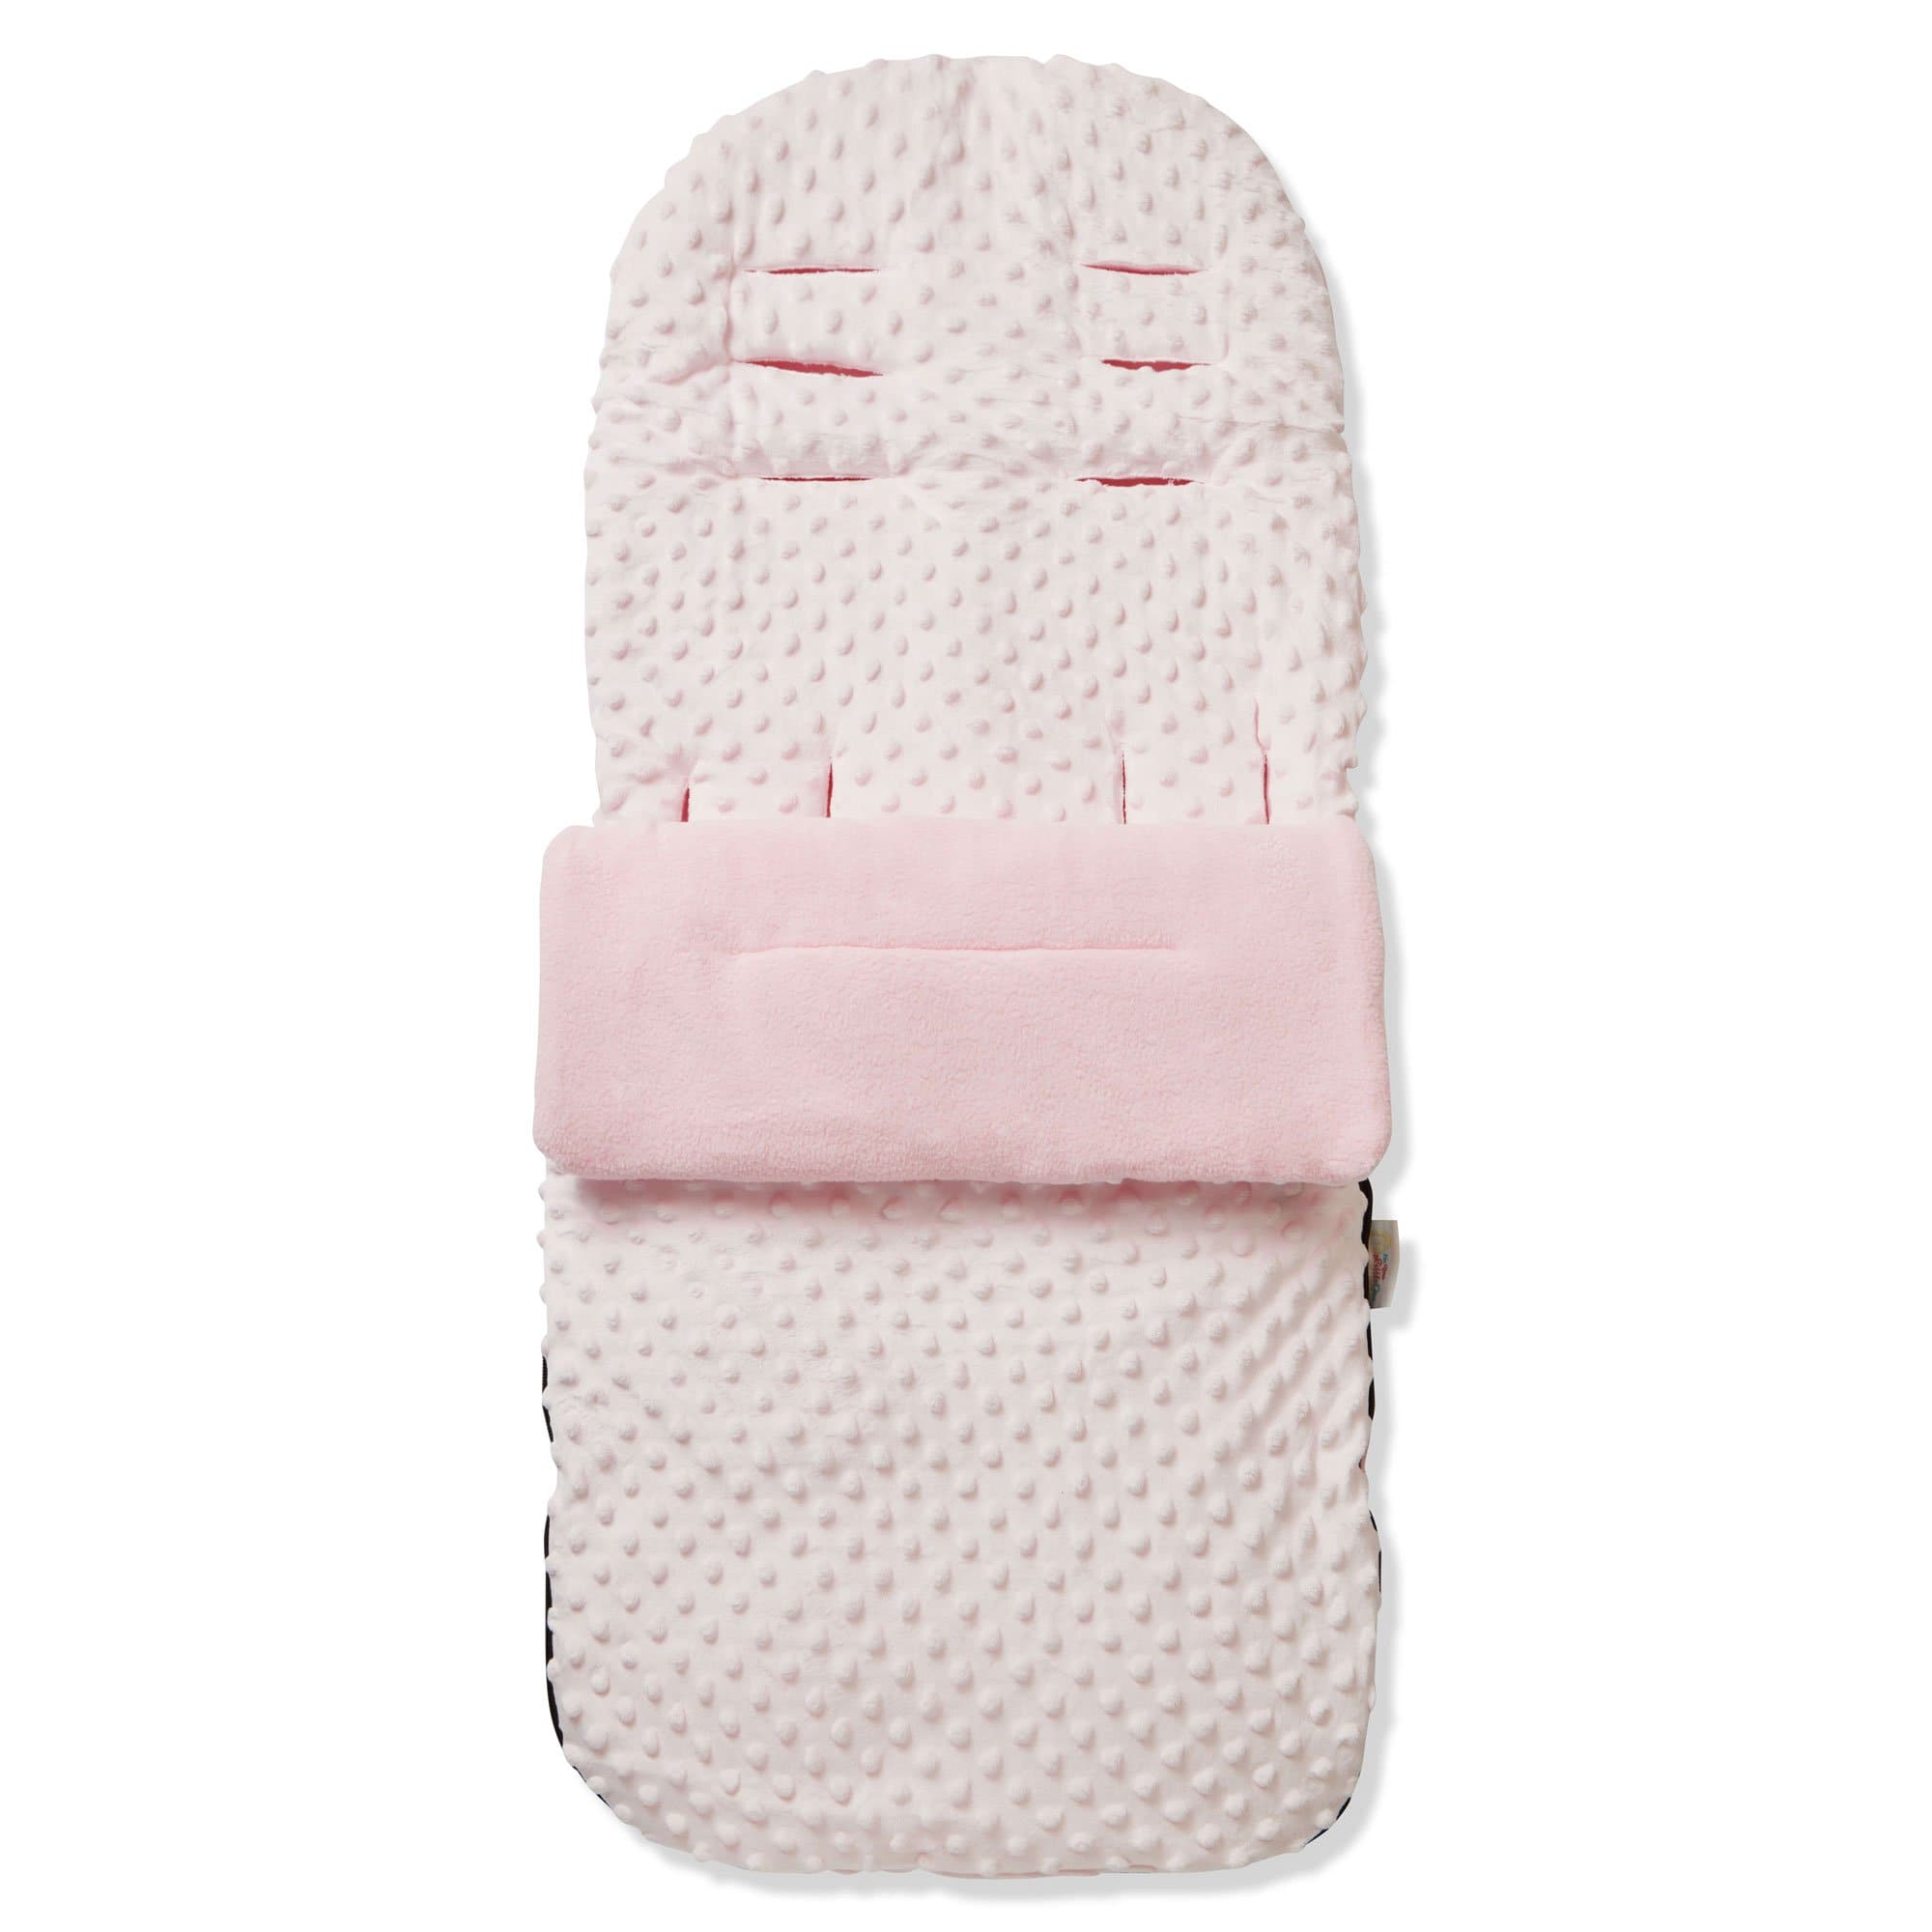 Dimple Footmuff / Cosy Toes Compatible with Red Kite - Pink / Fits All Models | For Your Little One